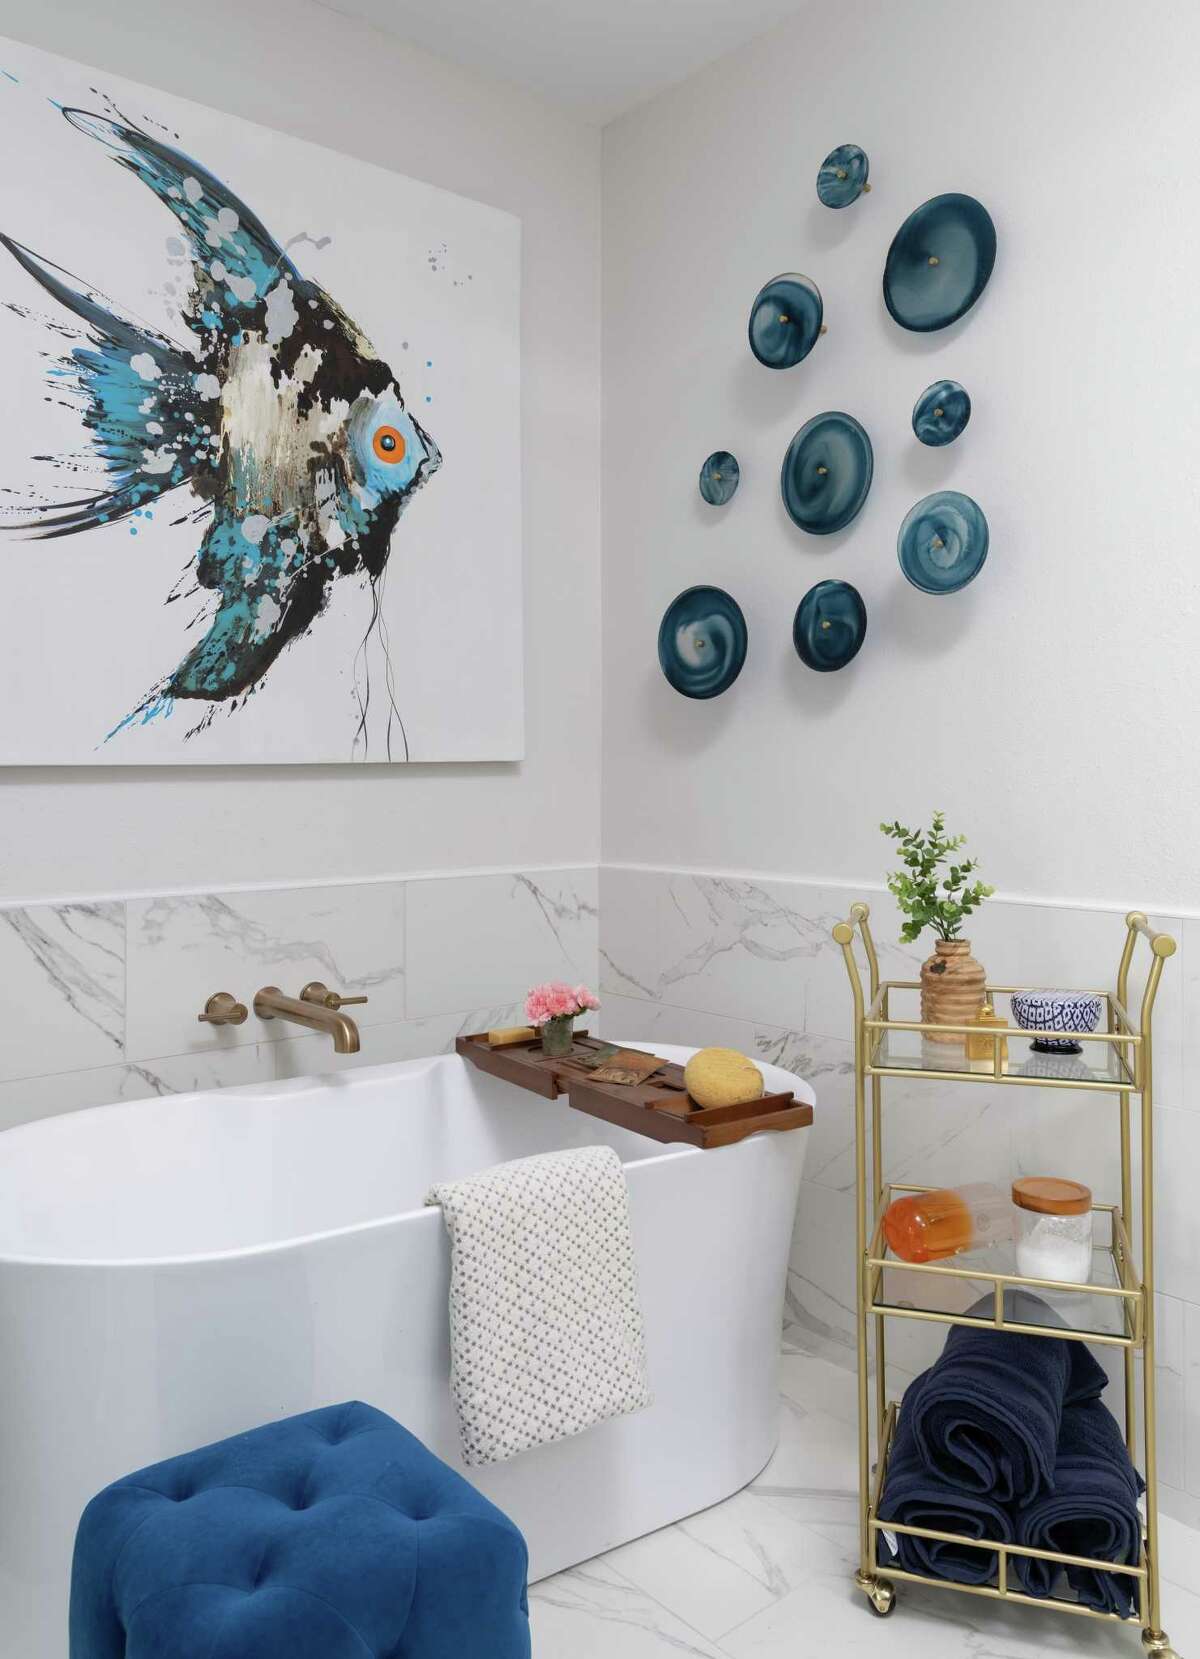 Stewart used the same porcelain tile on the floor, in the shower and partway up the wall behind a free-standing bathtub in the primary bathroom.